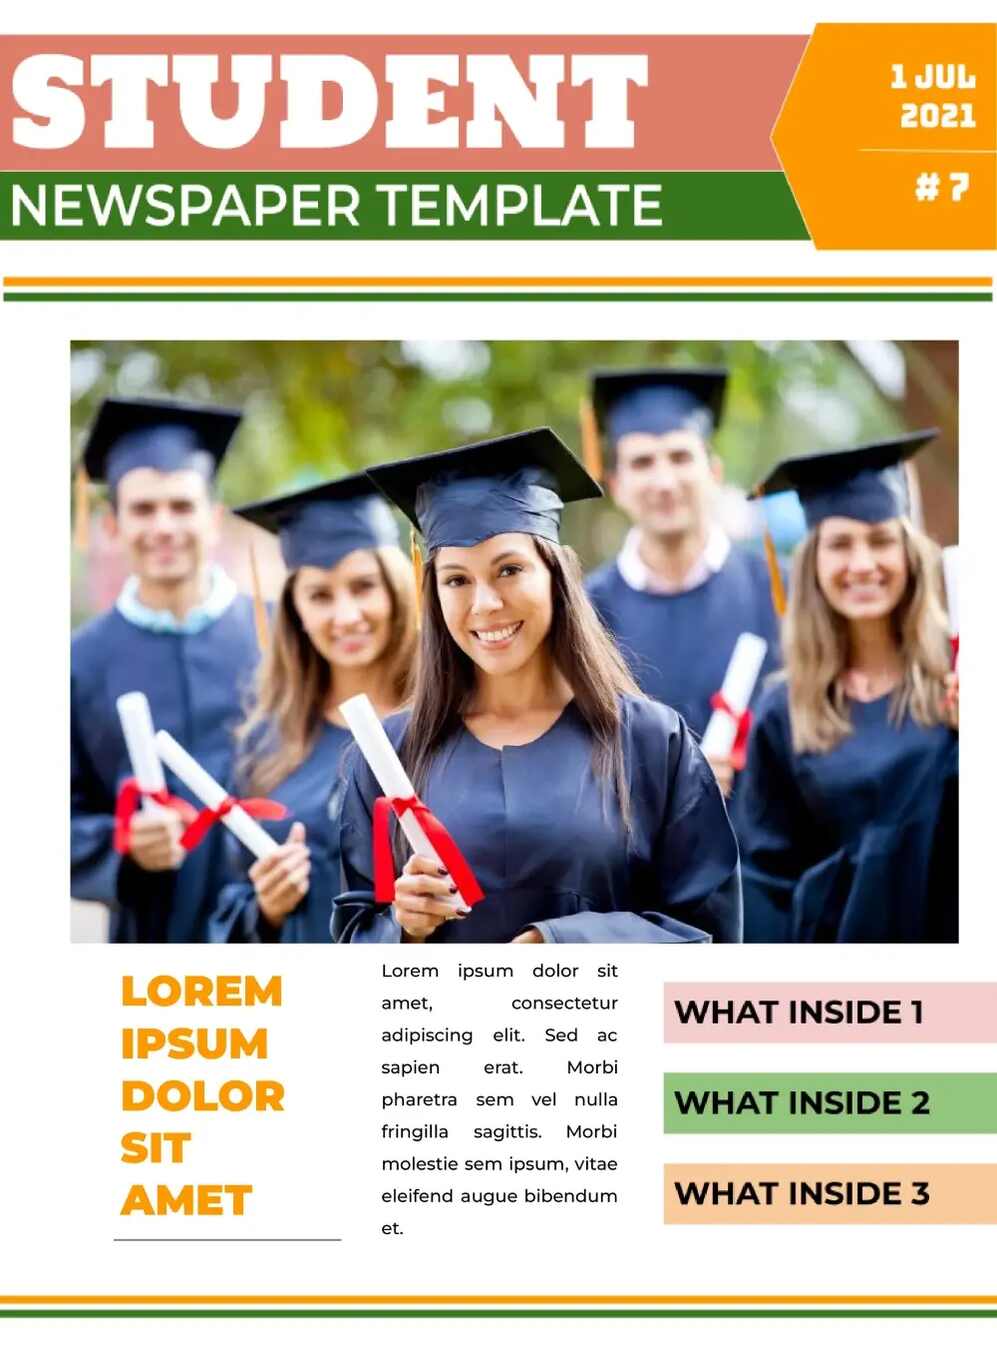 The newspaper template for students